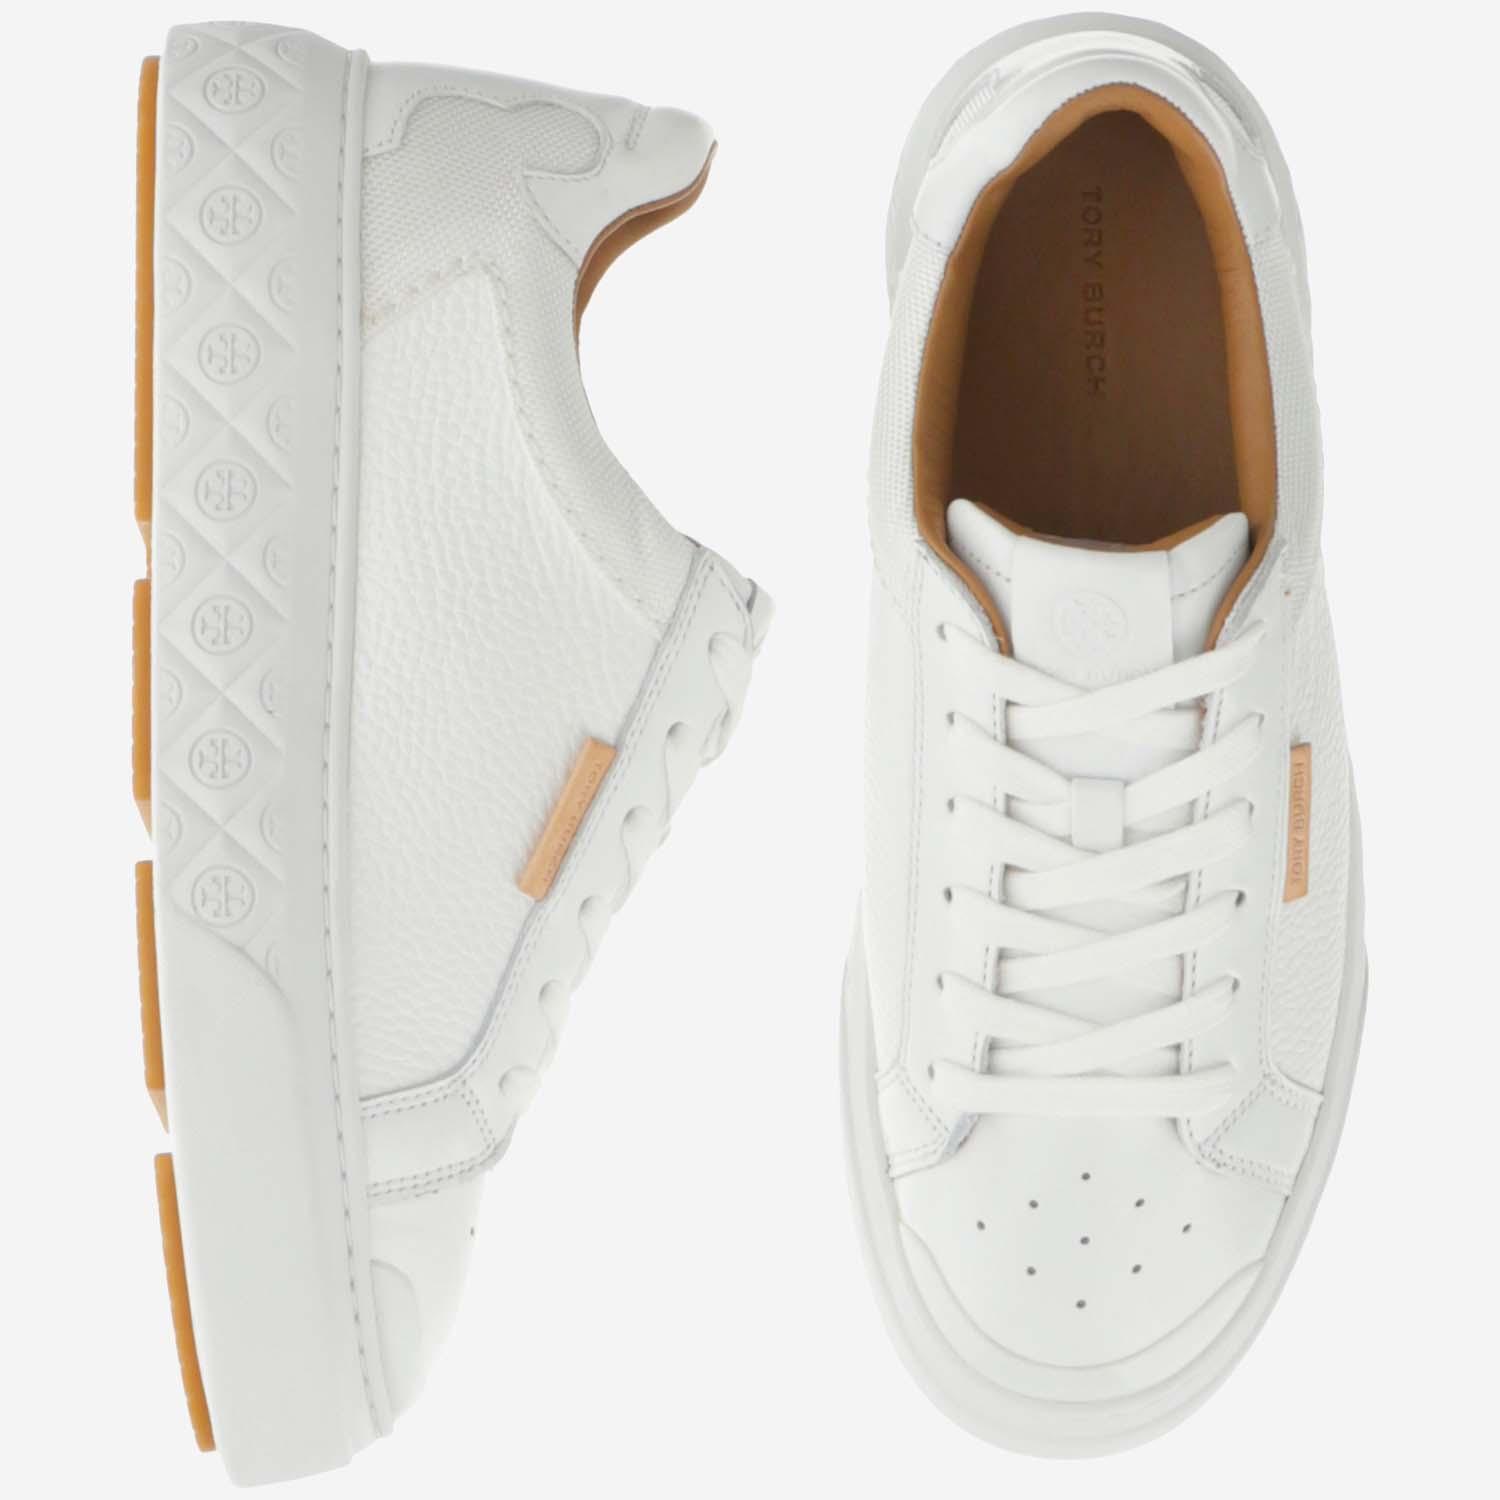 Tory Burch Ladybug Sneakers in White | Lyst